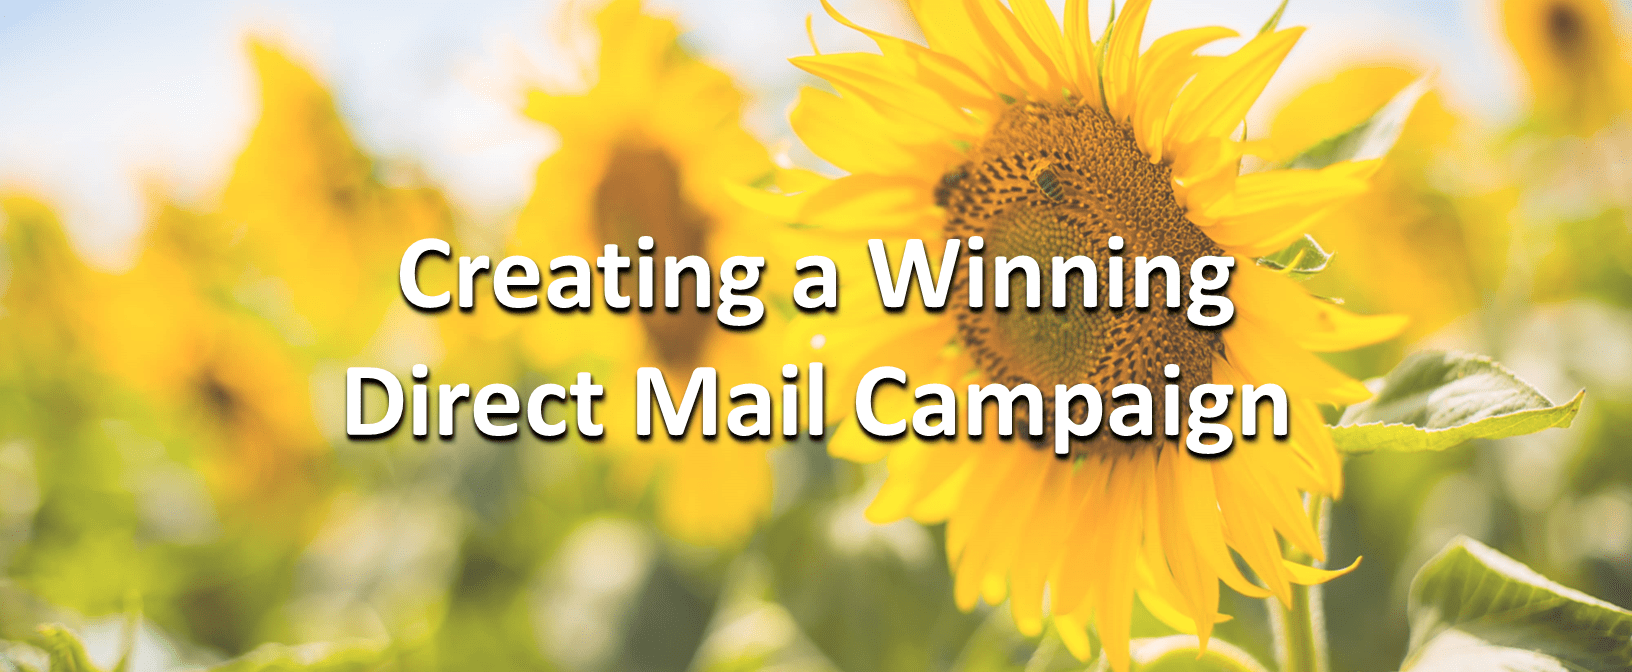 Creating a winning direct mail campaign